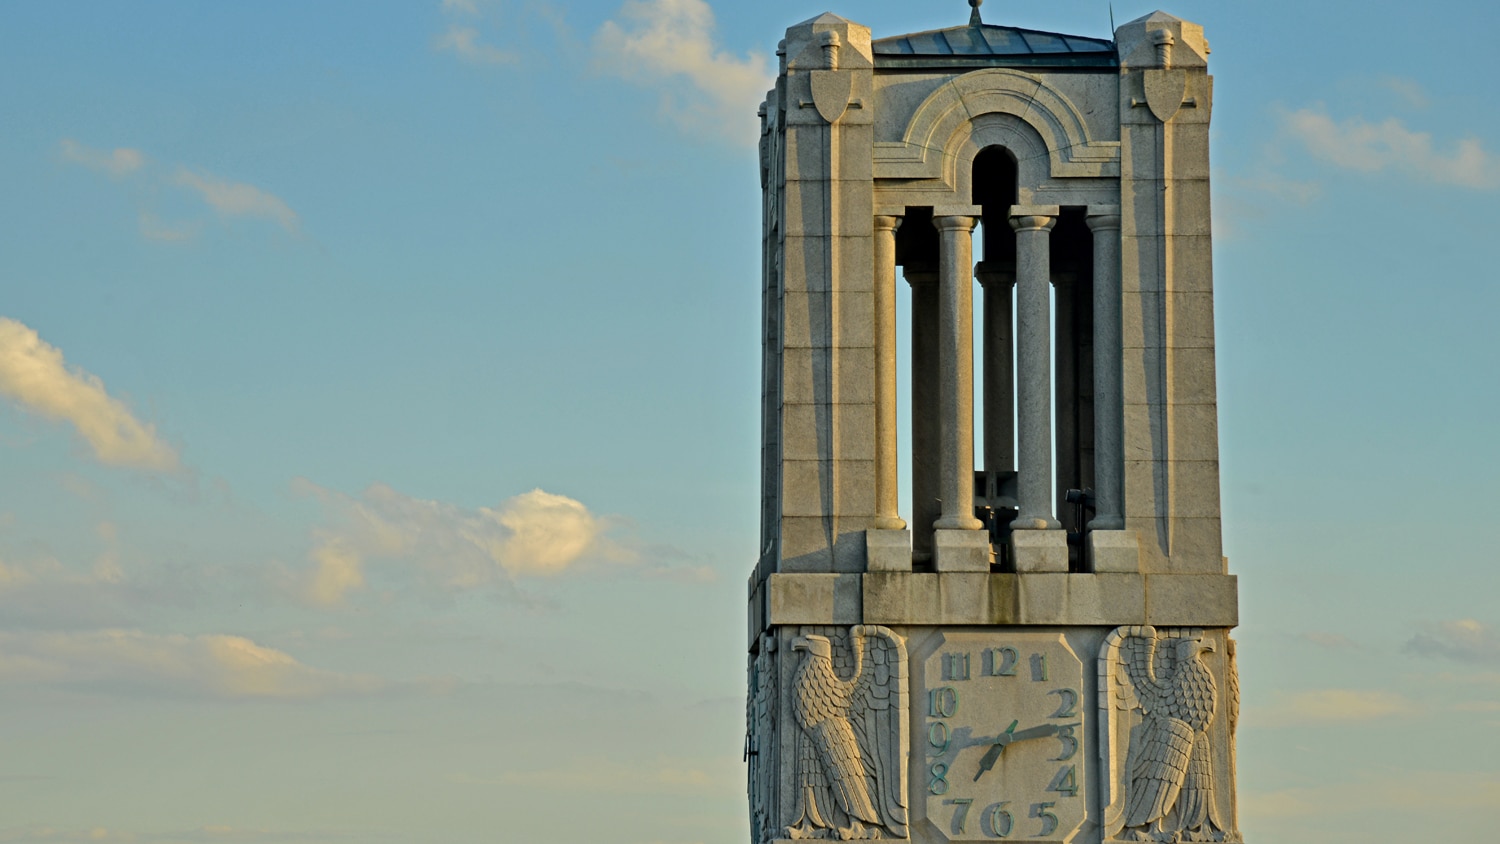 Late afternoon sun paints the NC State Belltower.